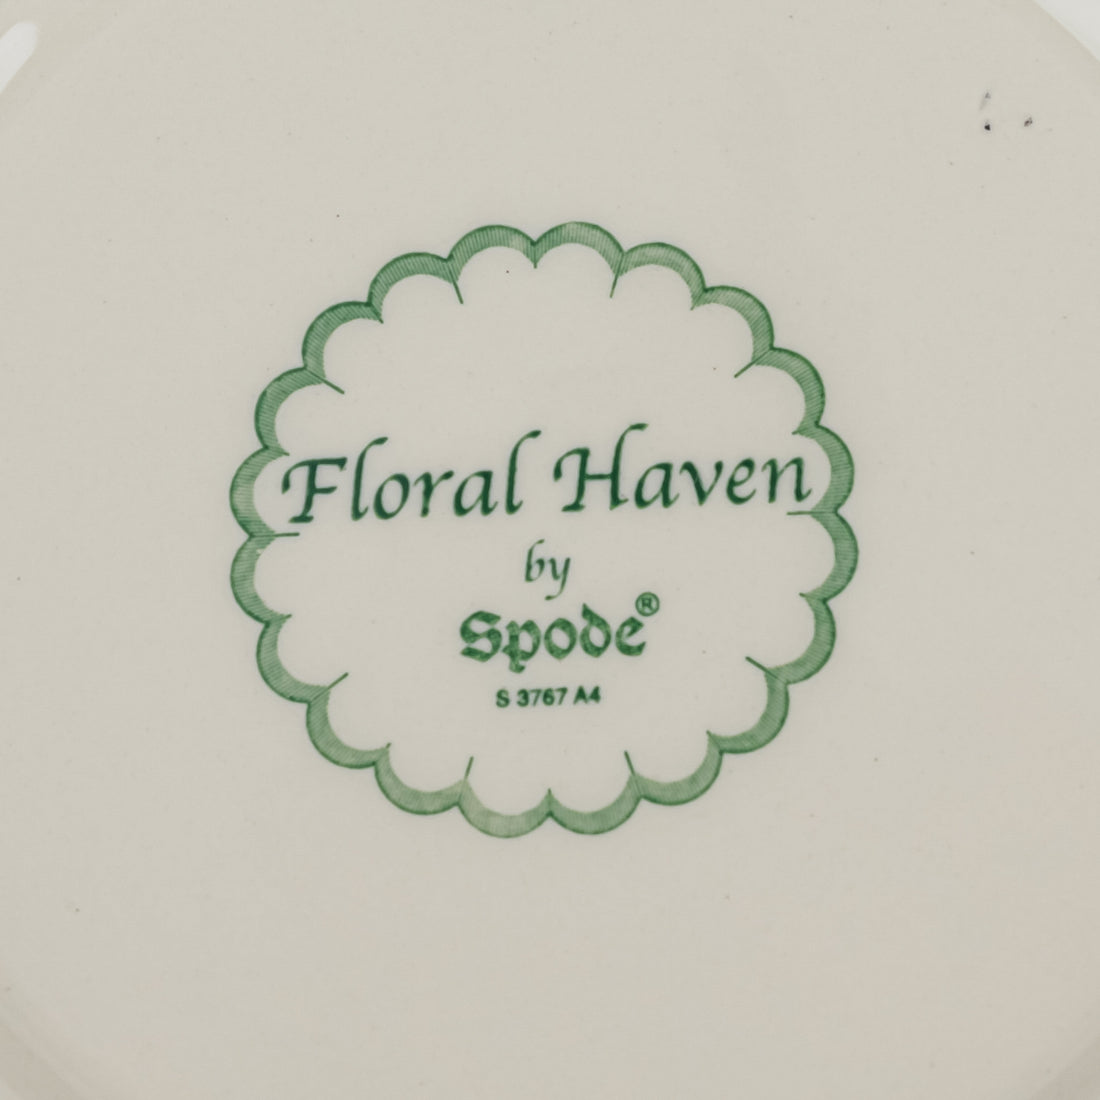 SPODE Floral Haven Cups & Saucers - Set of 4